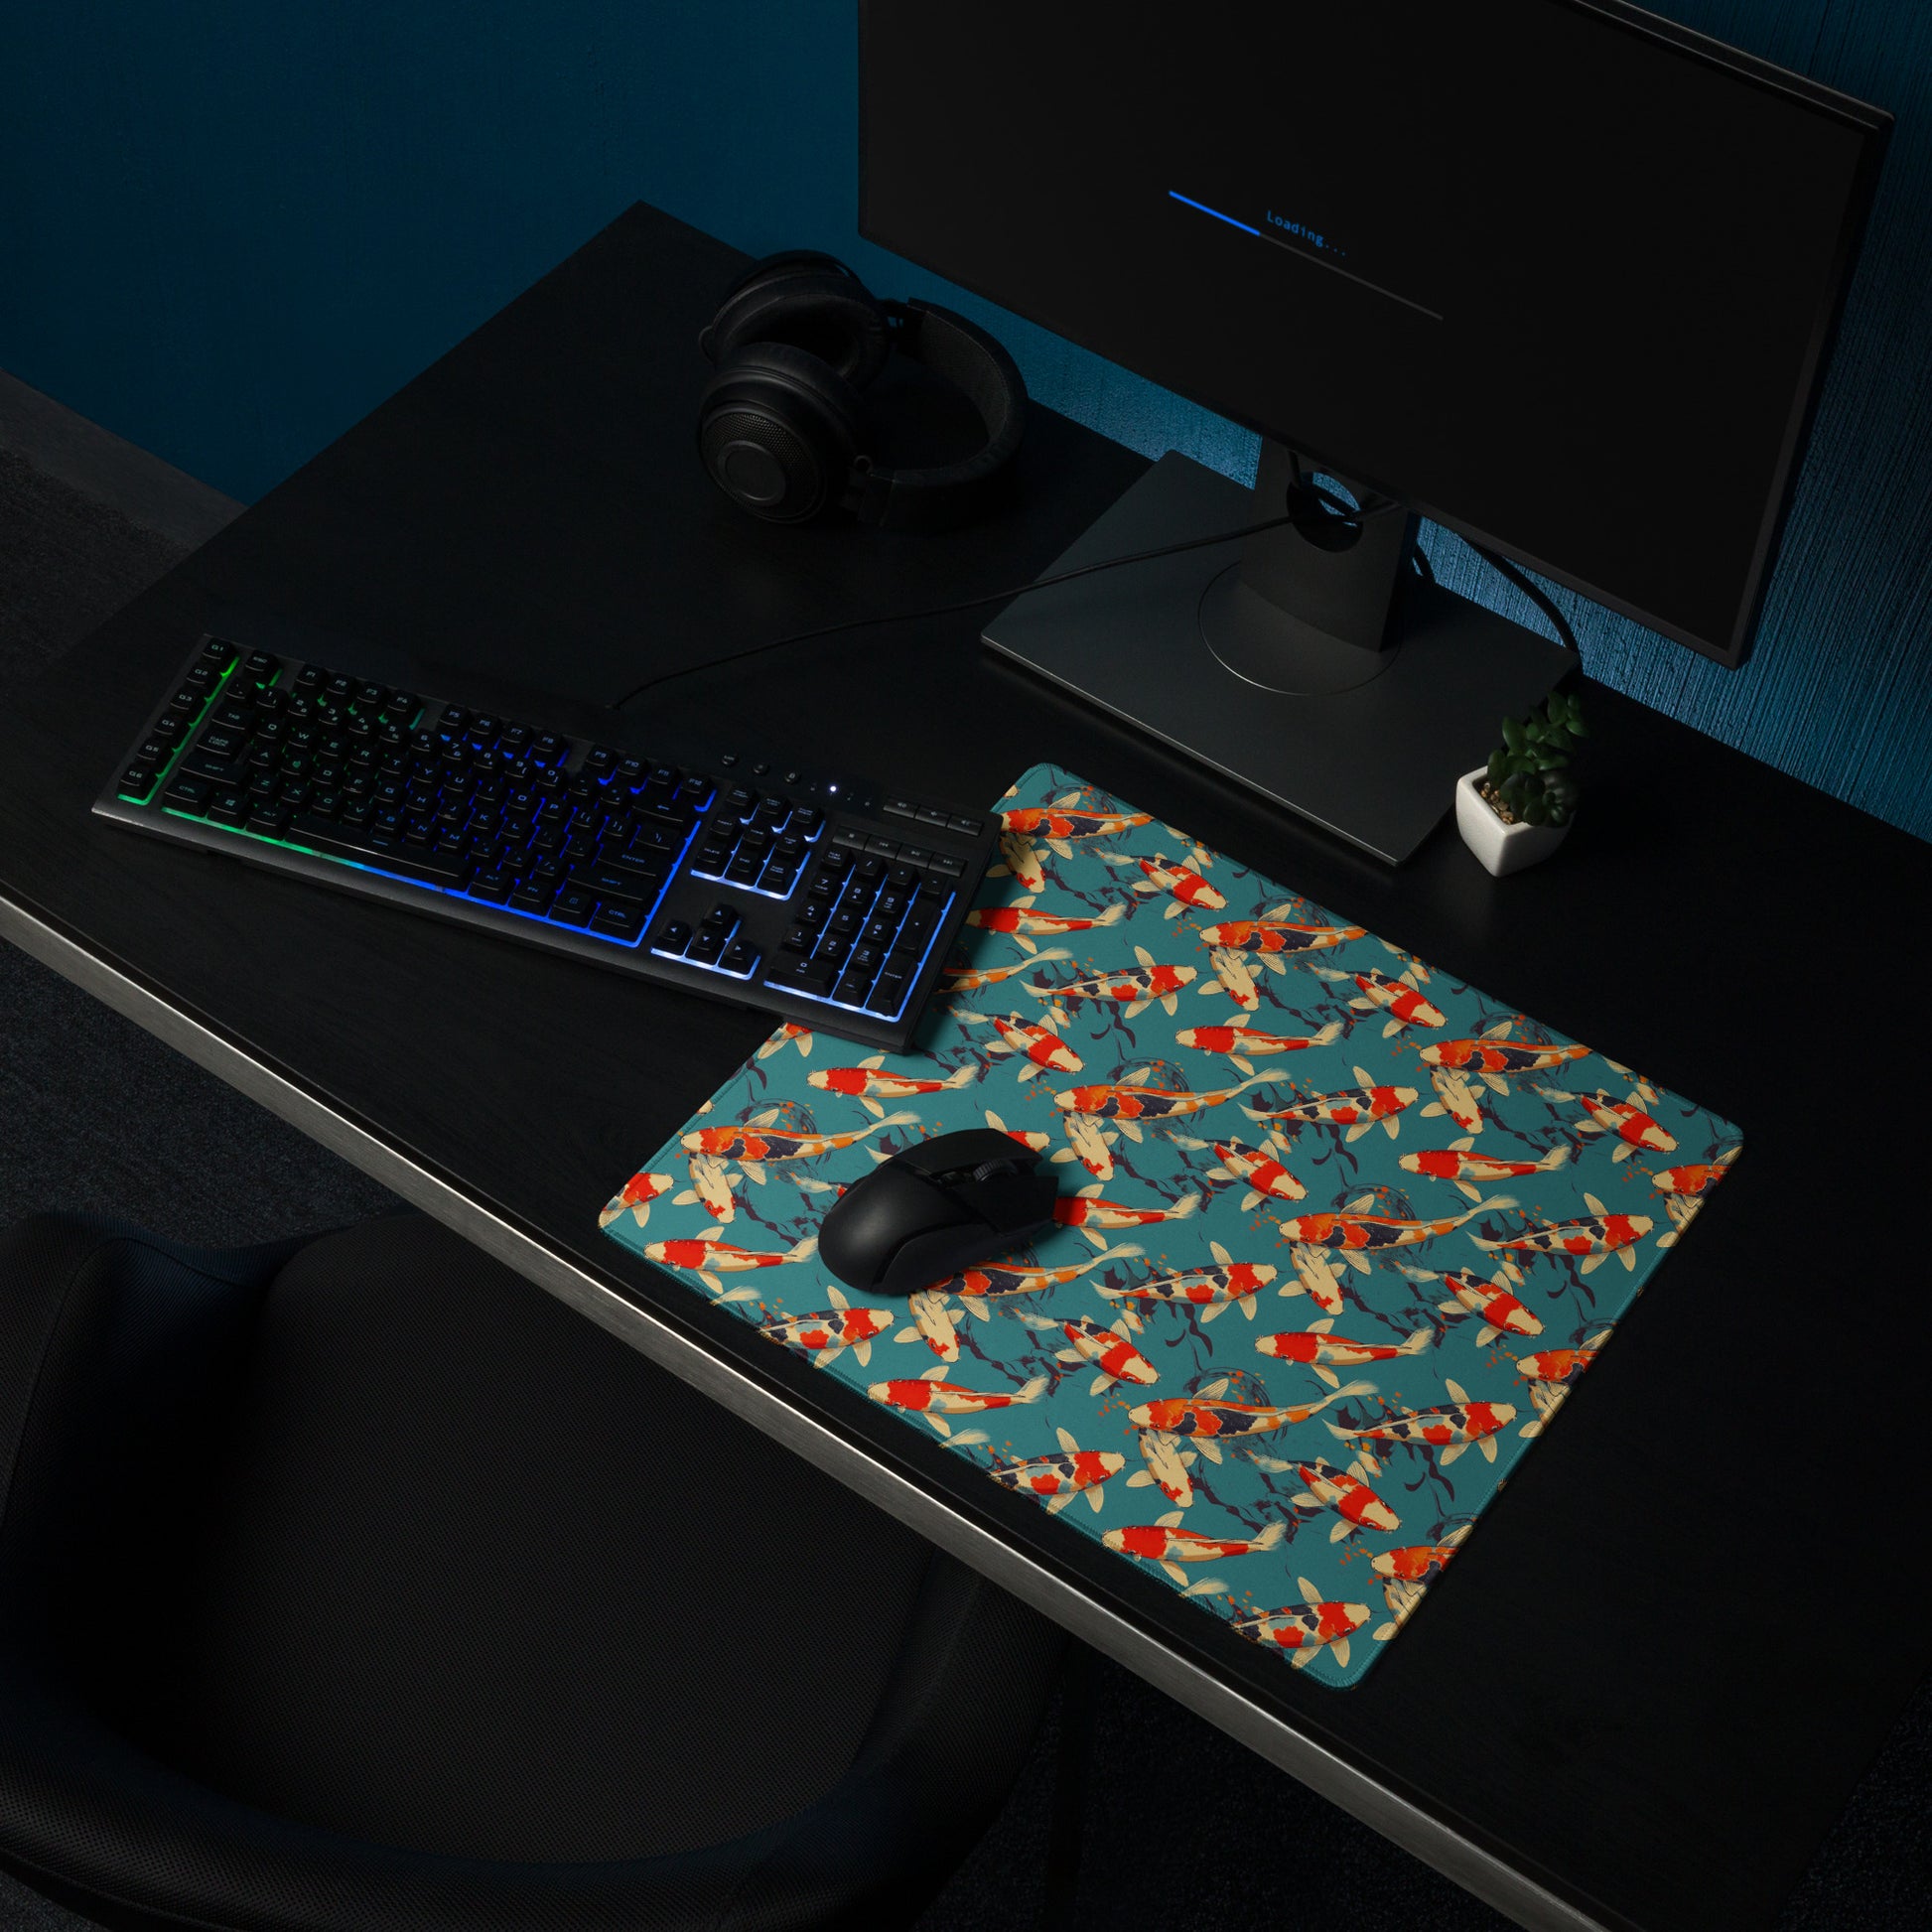 An 18" x 16" gaming desk pad with red koi fish on a blue background sitting on a desk. A keyboard and mouse sit on top of it.